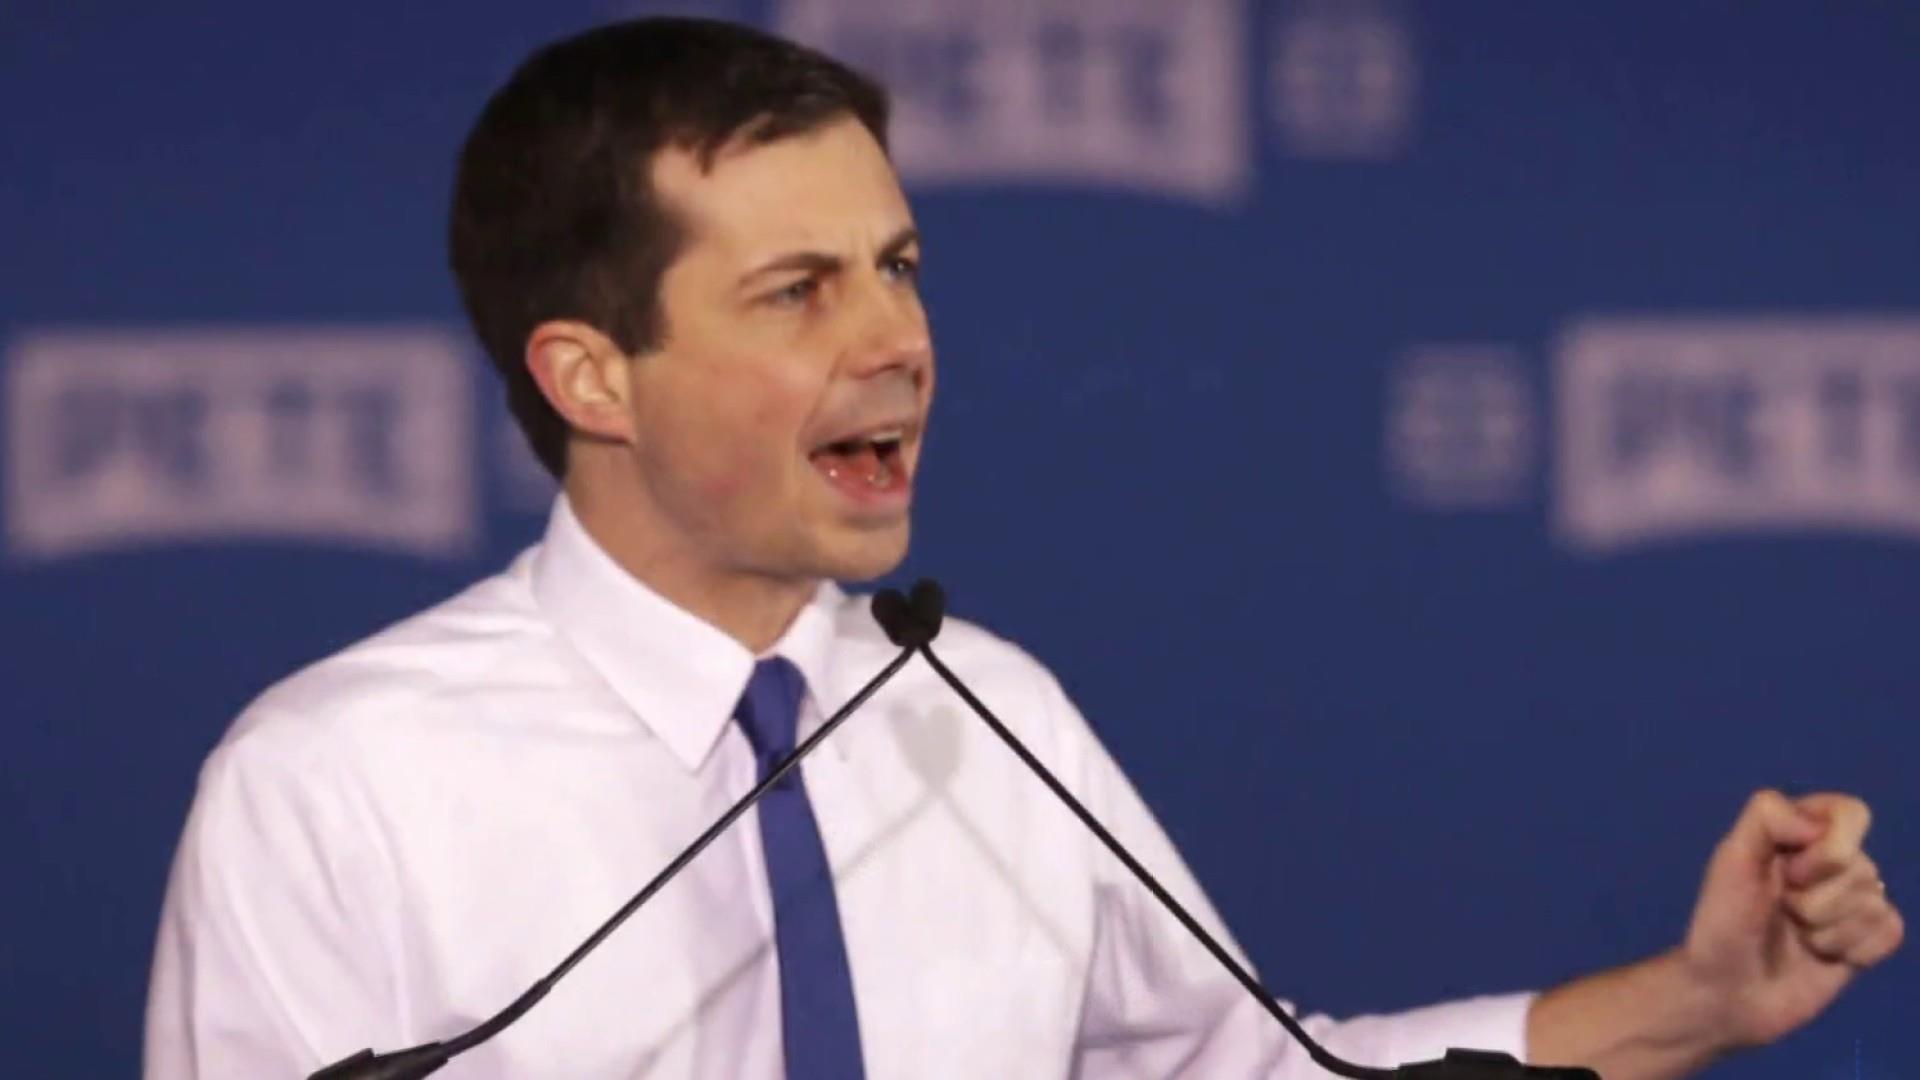 Pete Buttigieg 2020 Presidental Candidate Official Campaign Literature/Pamphlet 